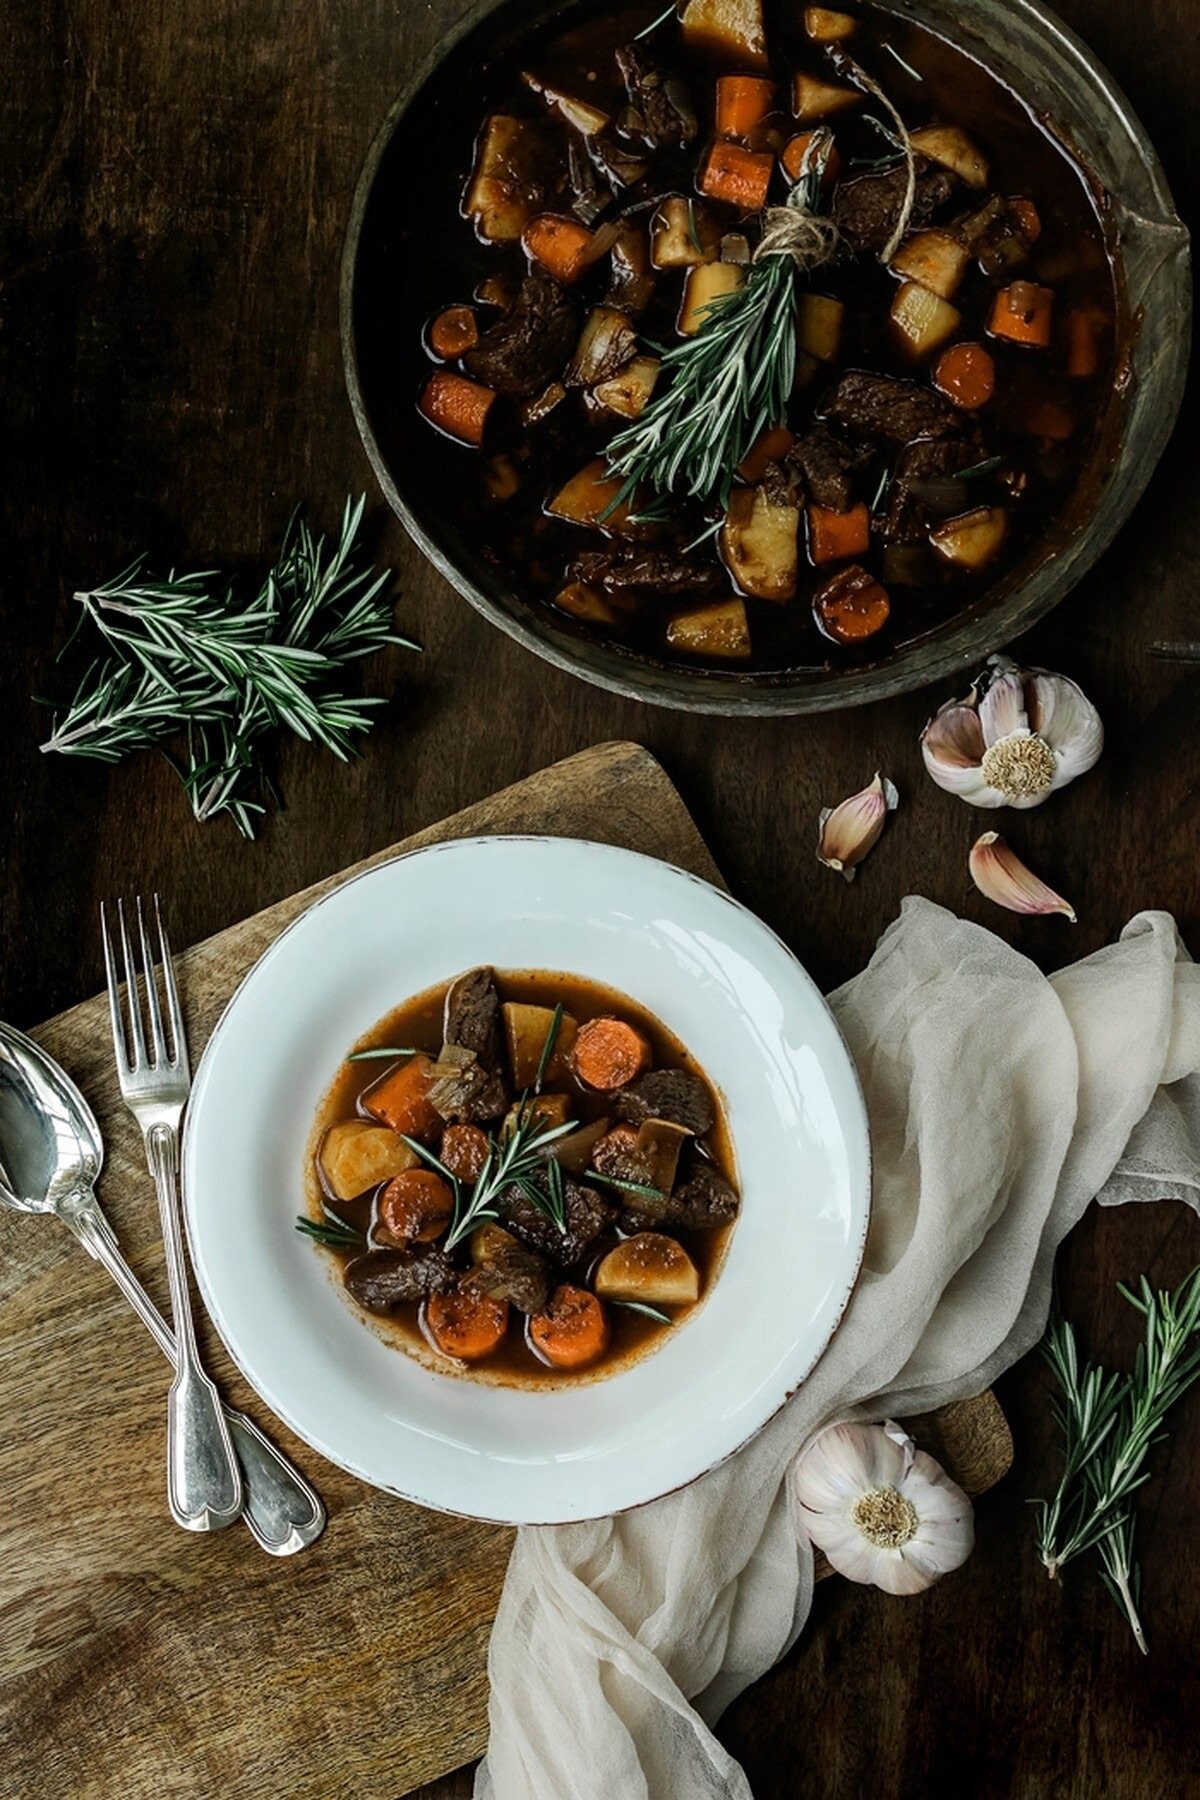 While we absolutely love the challenge of creating recipes that are unique and different, we also enjoy easy but still festive recipes that are special. Like this delicious slow cooked Beef Bourgignon. Comfort food at it’s best... Mmmm we love this classic!